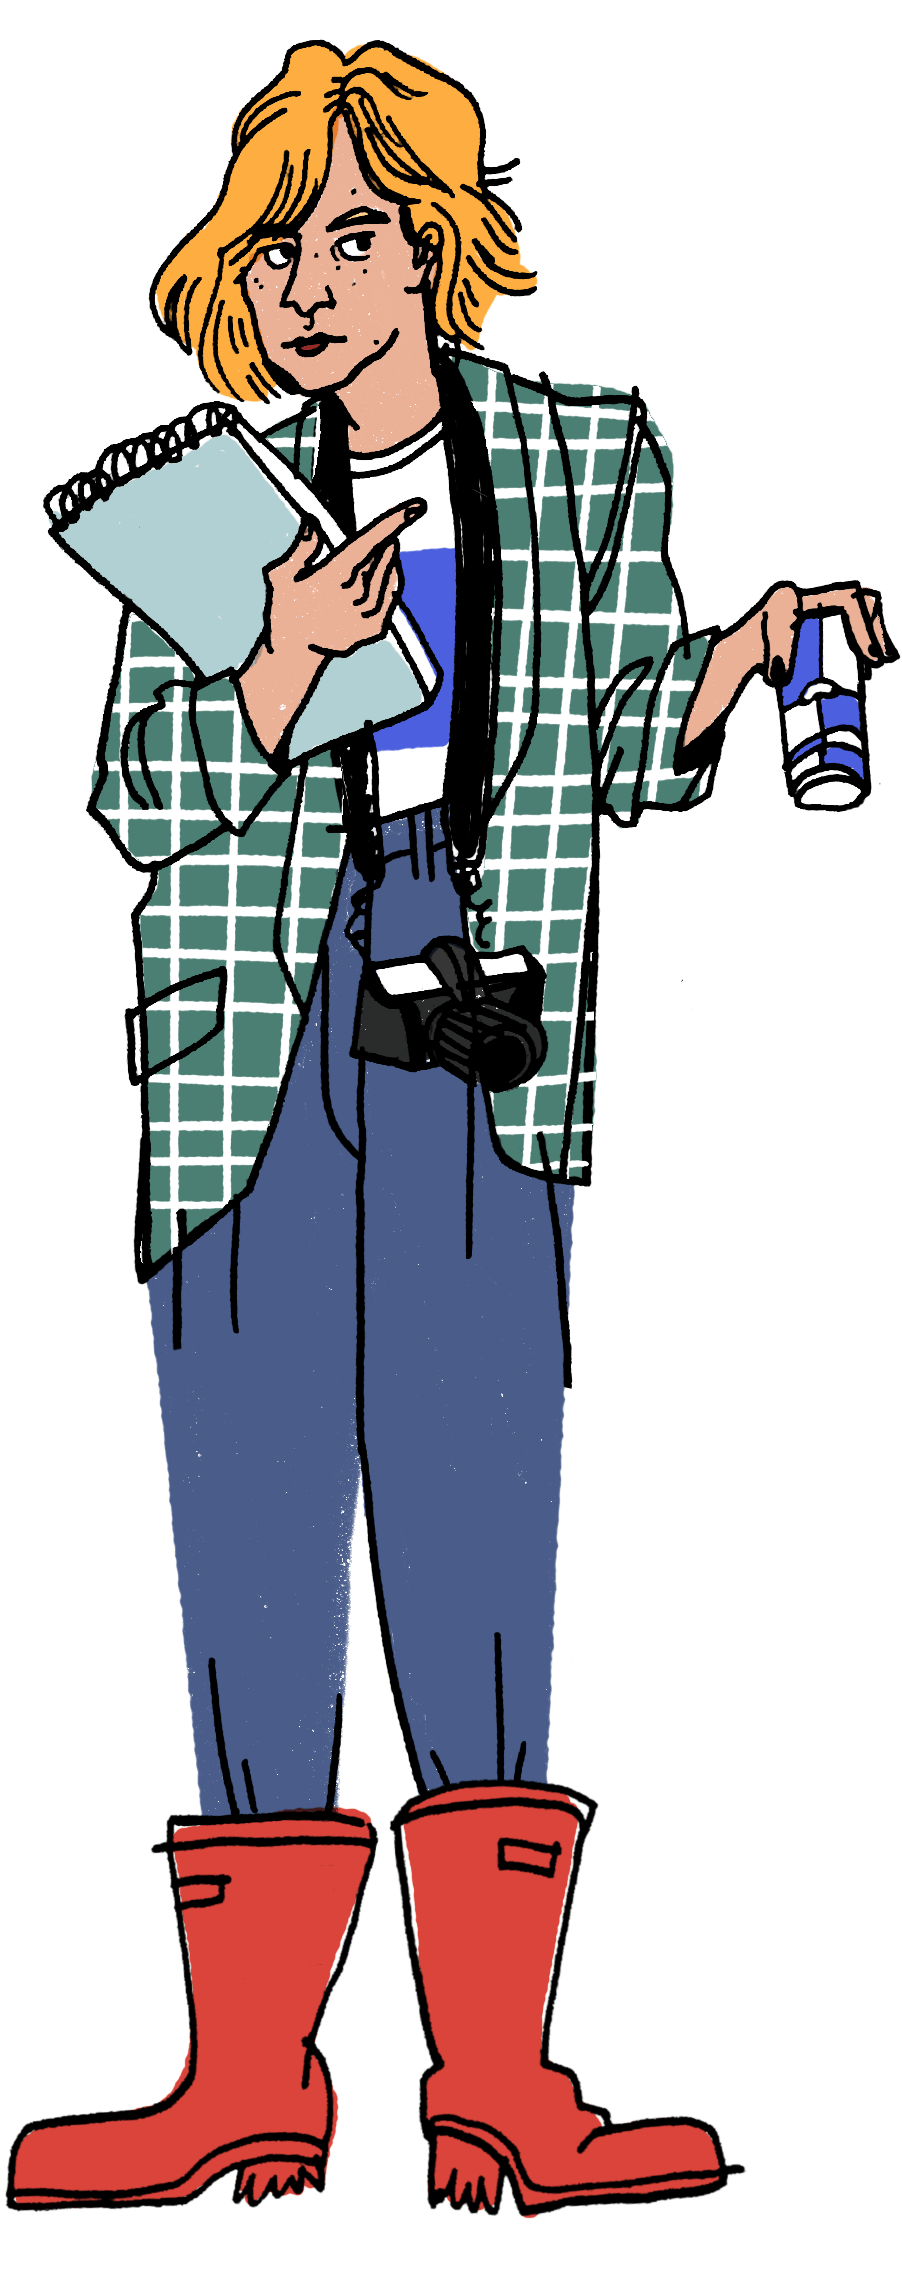 Illustration by Nono Flores of locations, a woman with blonde hair, holding a red bull, with a camera around her neck.